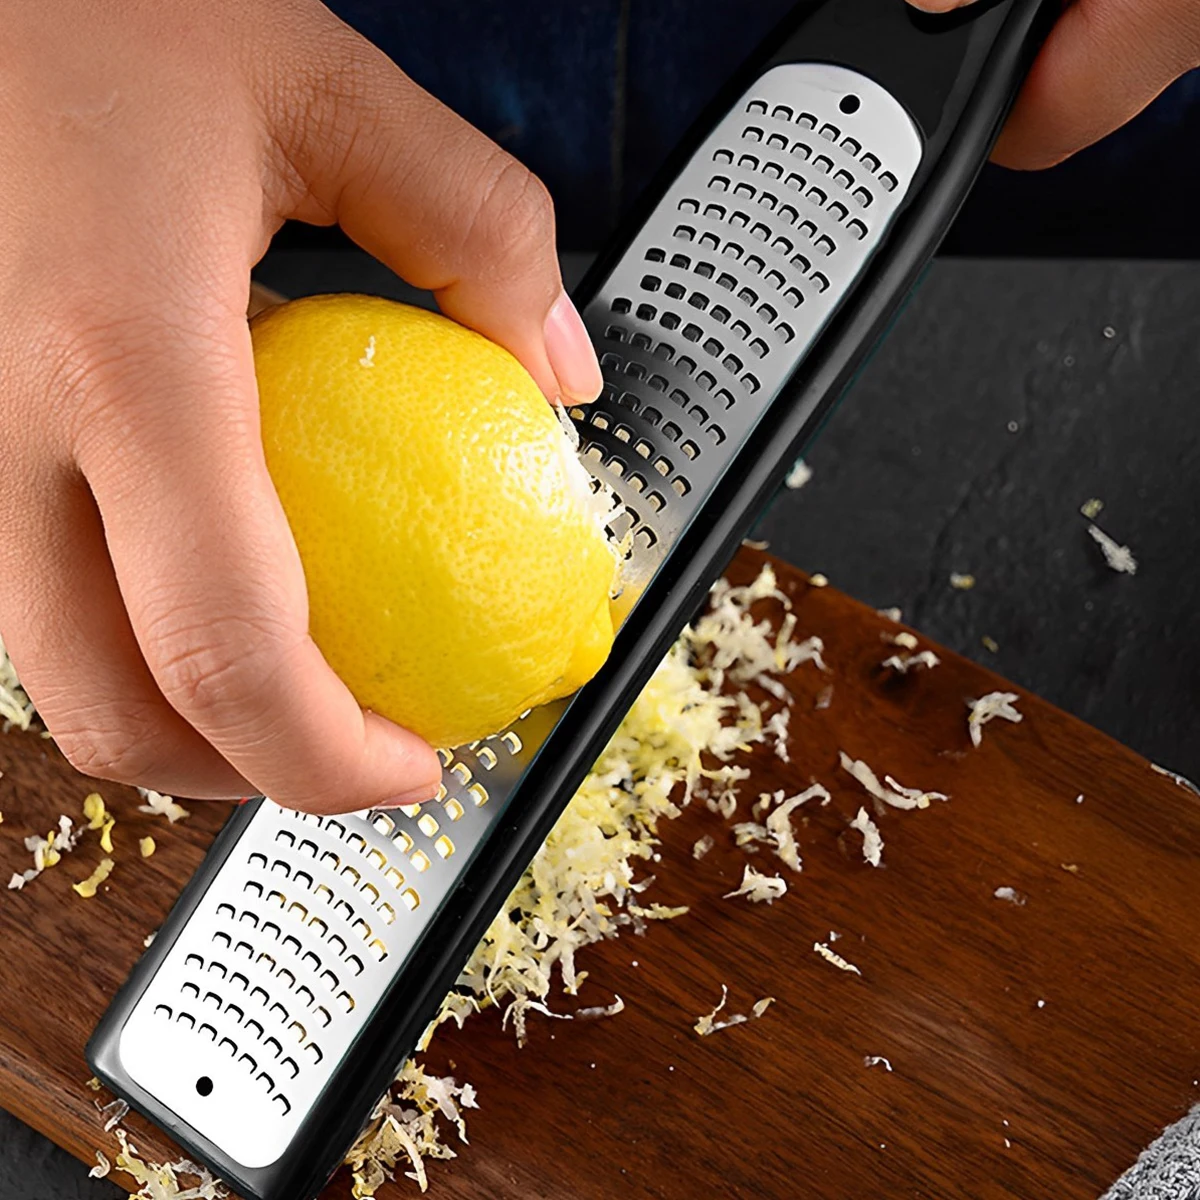 https://ae01.alicdn.com/kf/S09f614eca7964bb6a1abdcac5e61a2dcS/Stainless-Steel-Lemon-Zester-Professional-Kitchen-Cheese-and-Citrus-Grater-with-Protective-Cover-and-Brush-Non.jpg